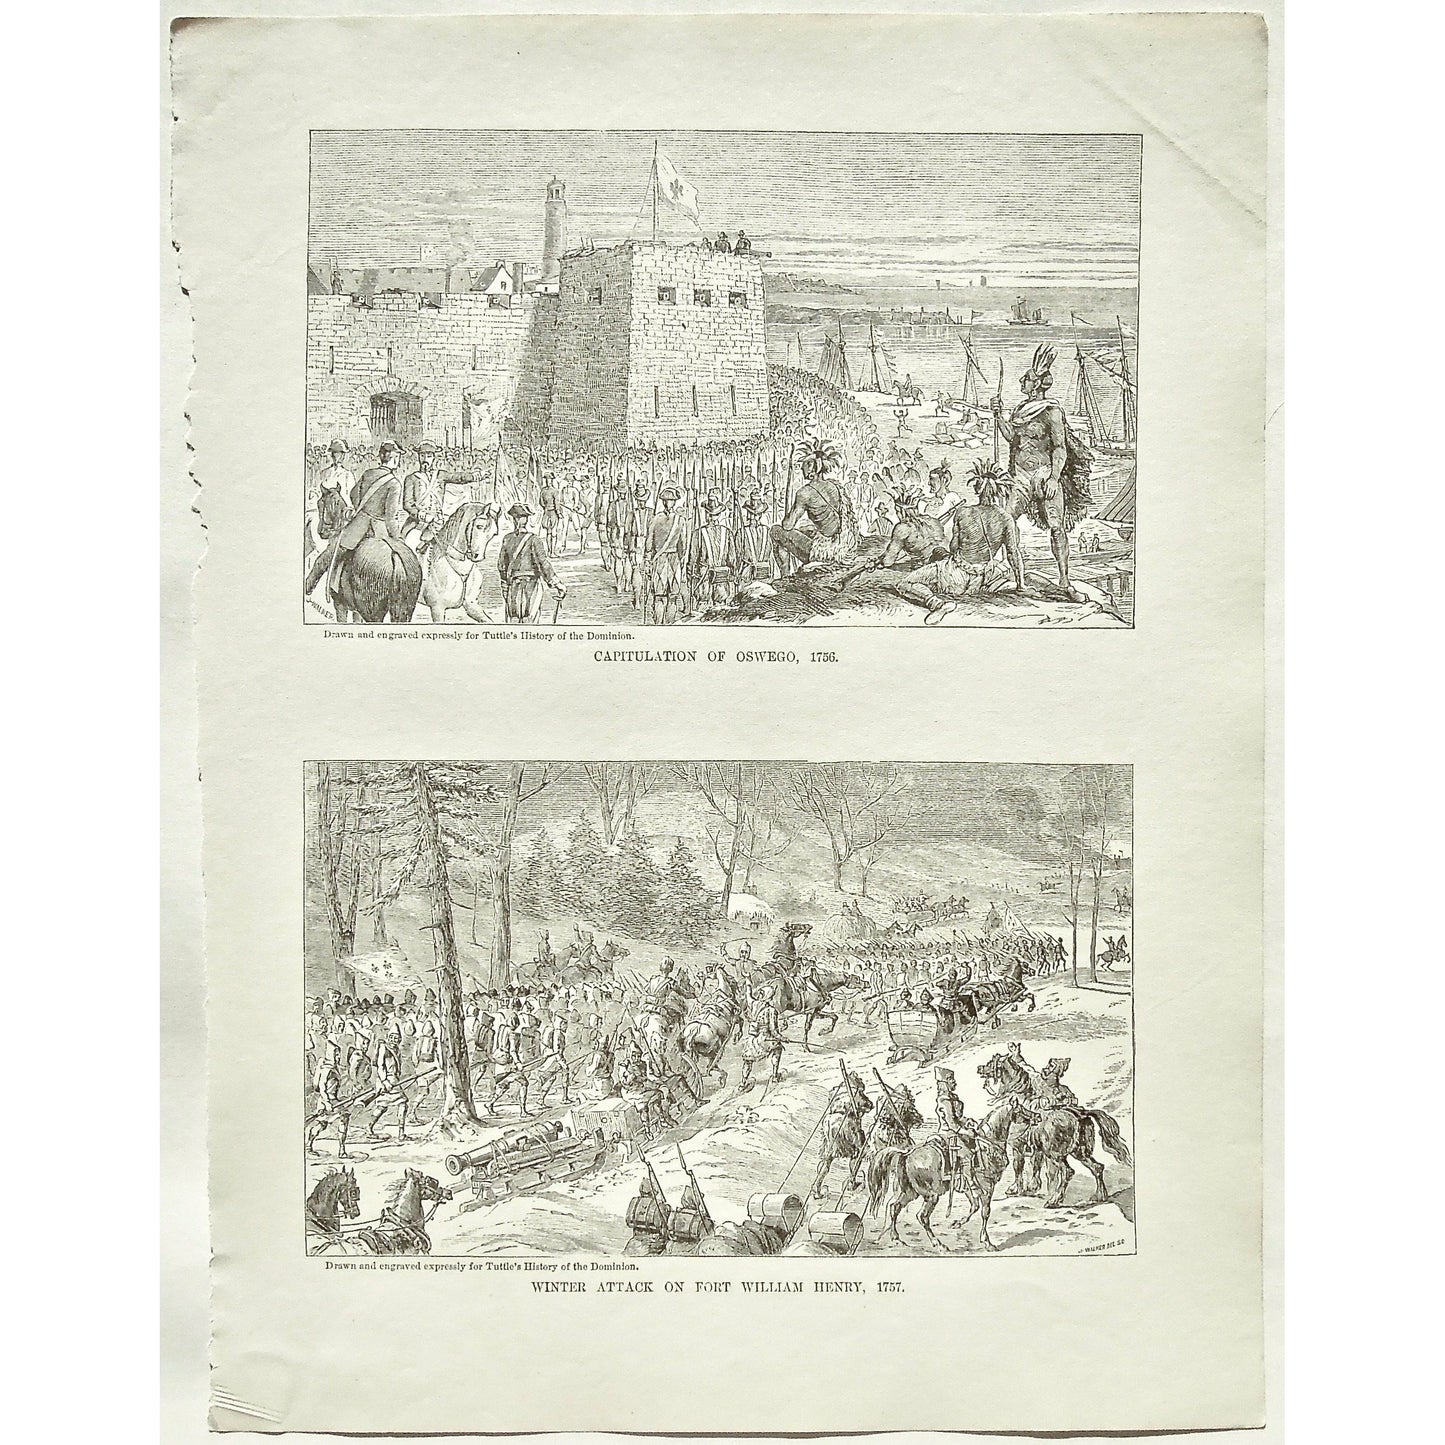 Capitulation of Oswego, 1756, Capitulation, Oswego, Winter Attack on Fort William Henry, Winter Attack, Attack, Fort William Henry, 1757, Fort, Natives, Soldiers, Troops, Cavalry, Weapons, Guns, War, Army, Formation, Canons, Swords, Sleds, Sleigh, Sleighs, Flag, Tuttle, Charles Tuttle, History of the Dominion, Popular History of the Dominion, Downie, Bigney, History, Dominion, Canada, Canadian History, Antique, Antique Print, Steel Engraving, Engraving, Prints, Printmaking, Original, Rare prints, rare books